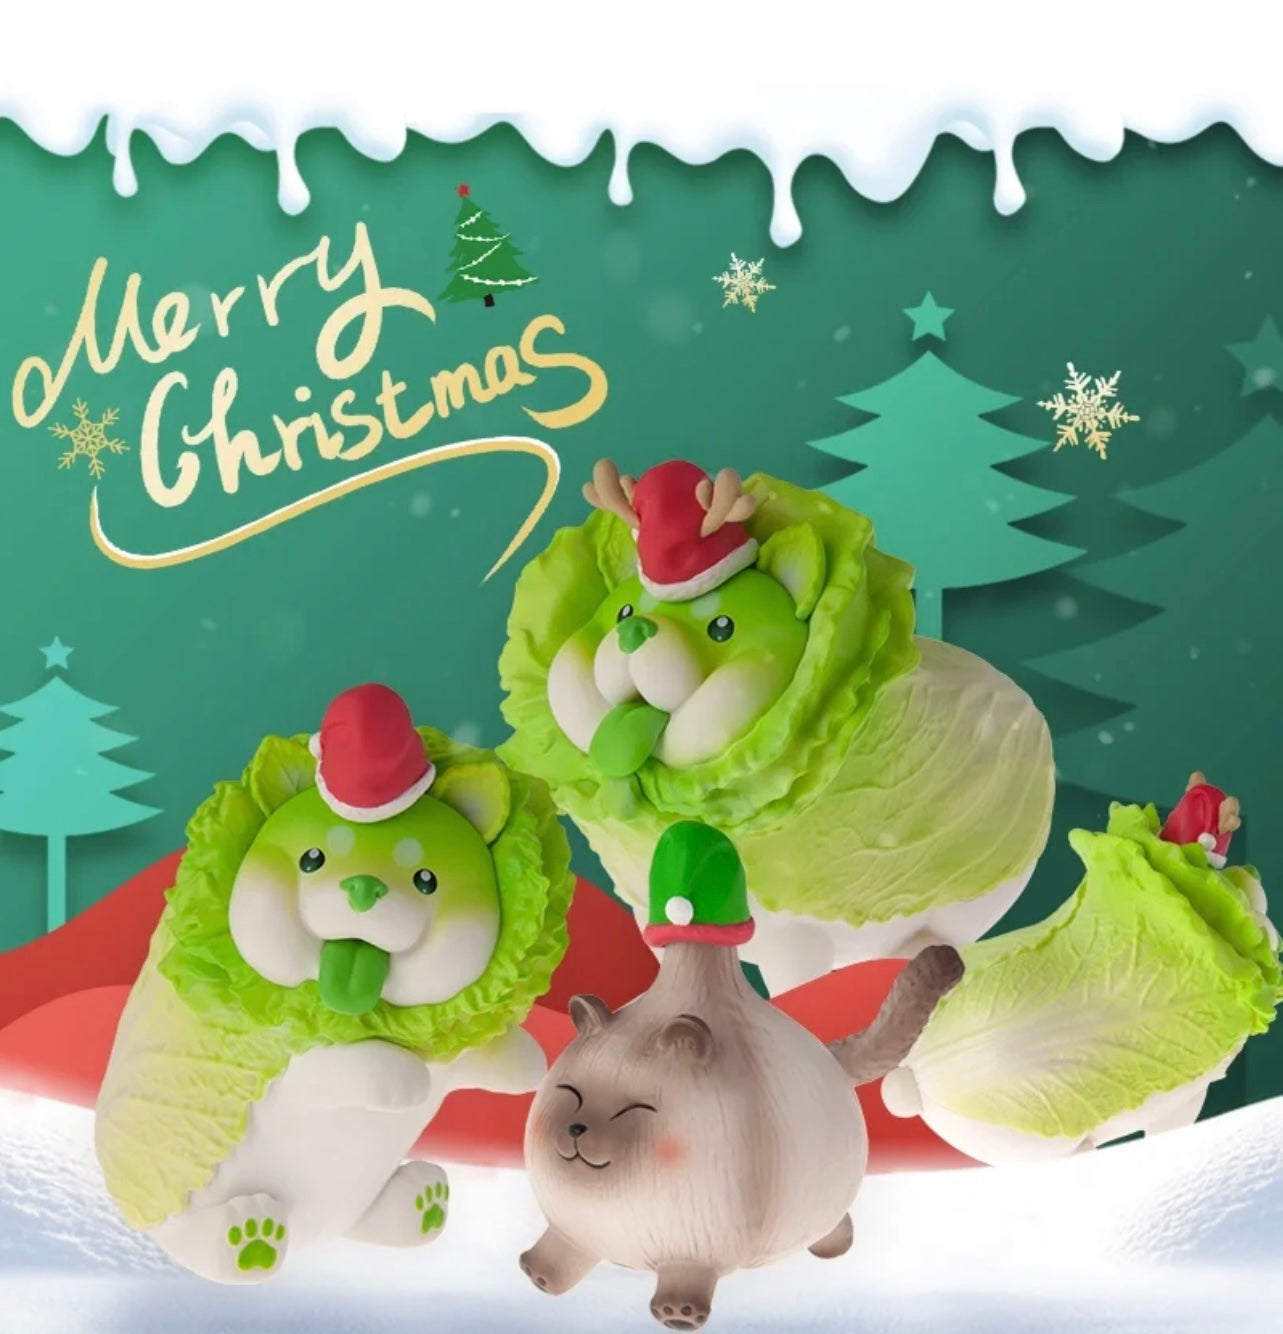 [DODOWO] Cabbage Dog - Christmas Limited Edition Art Toy